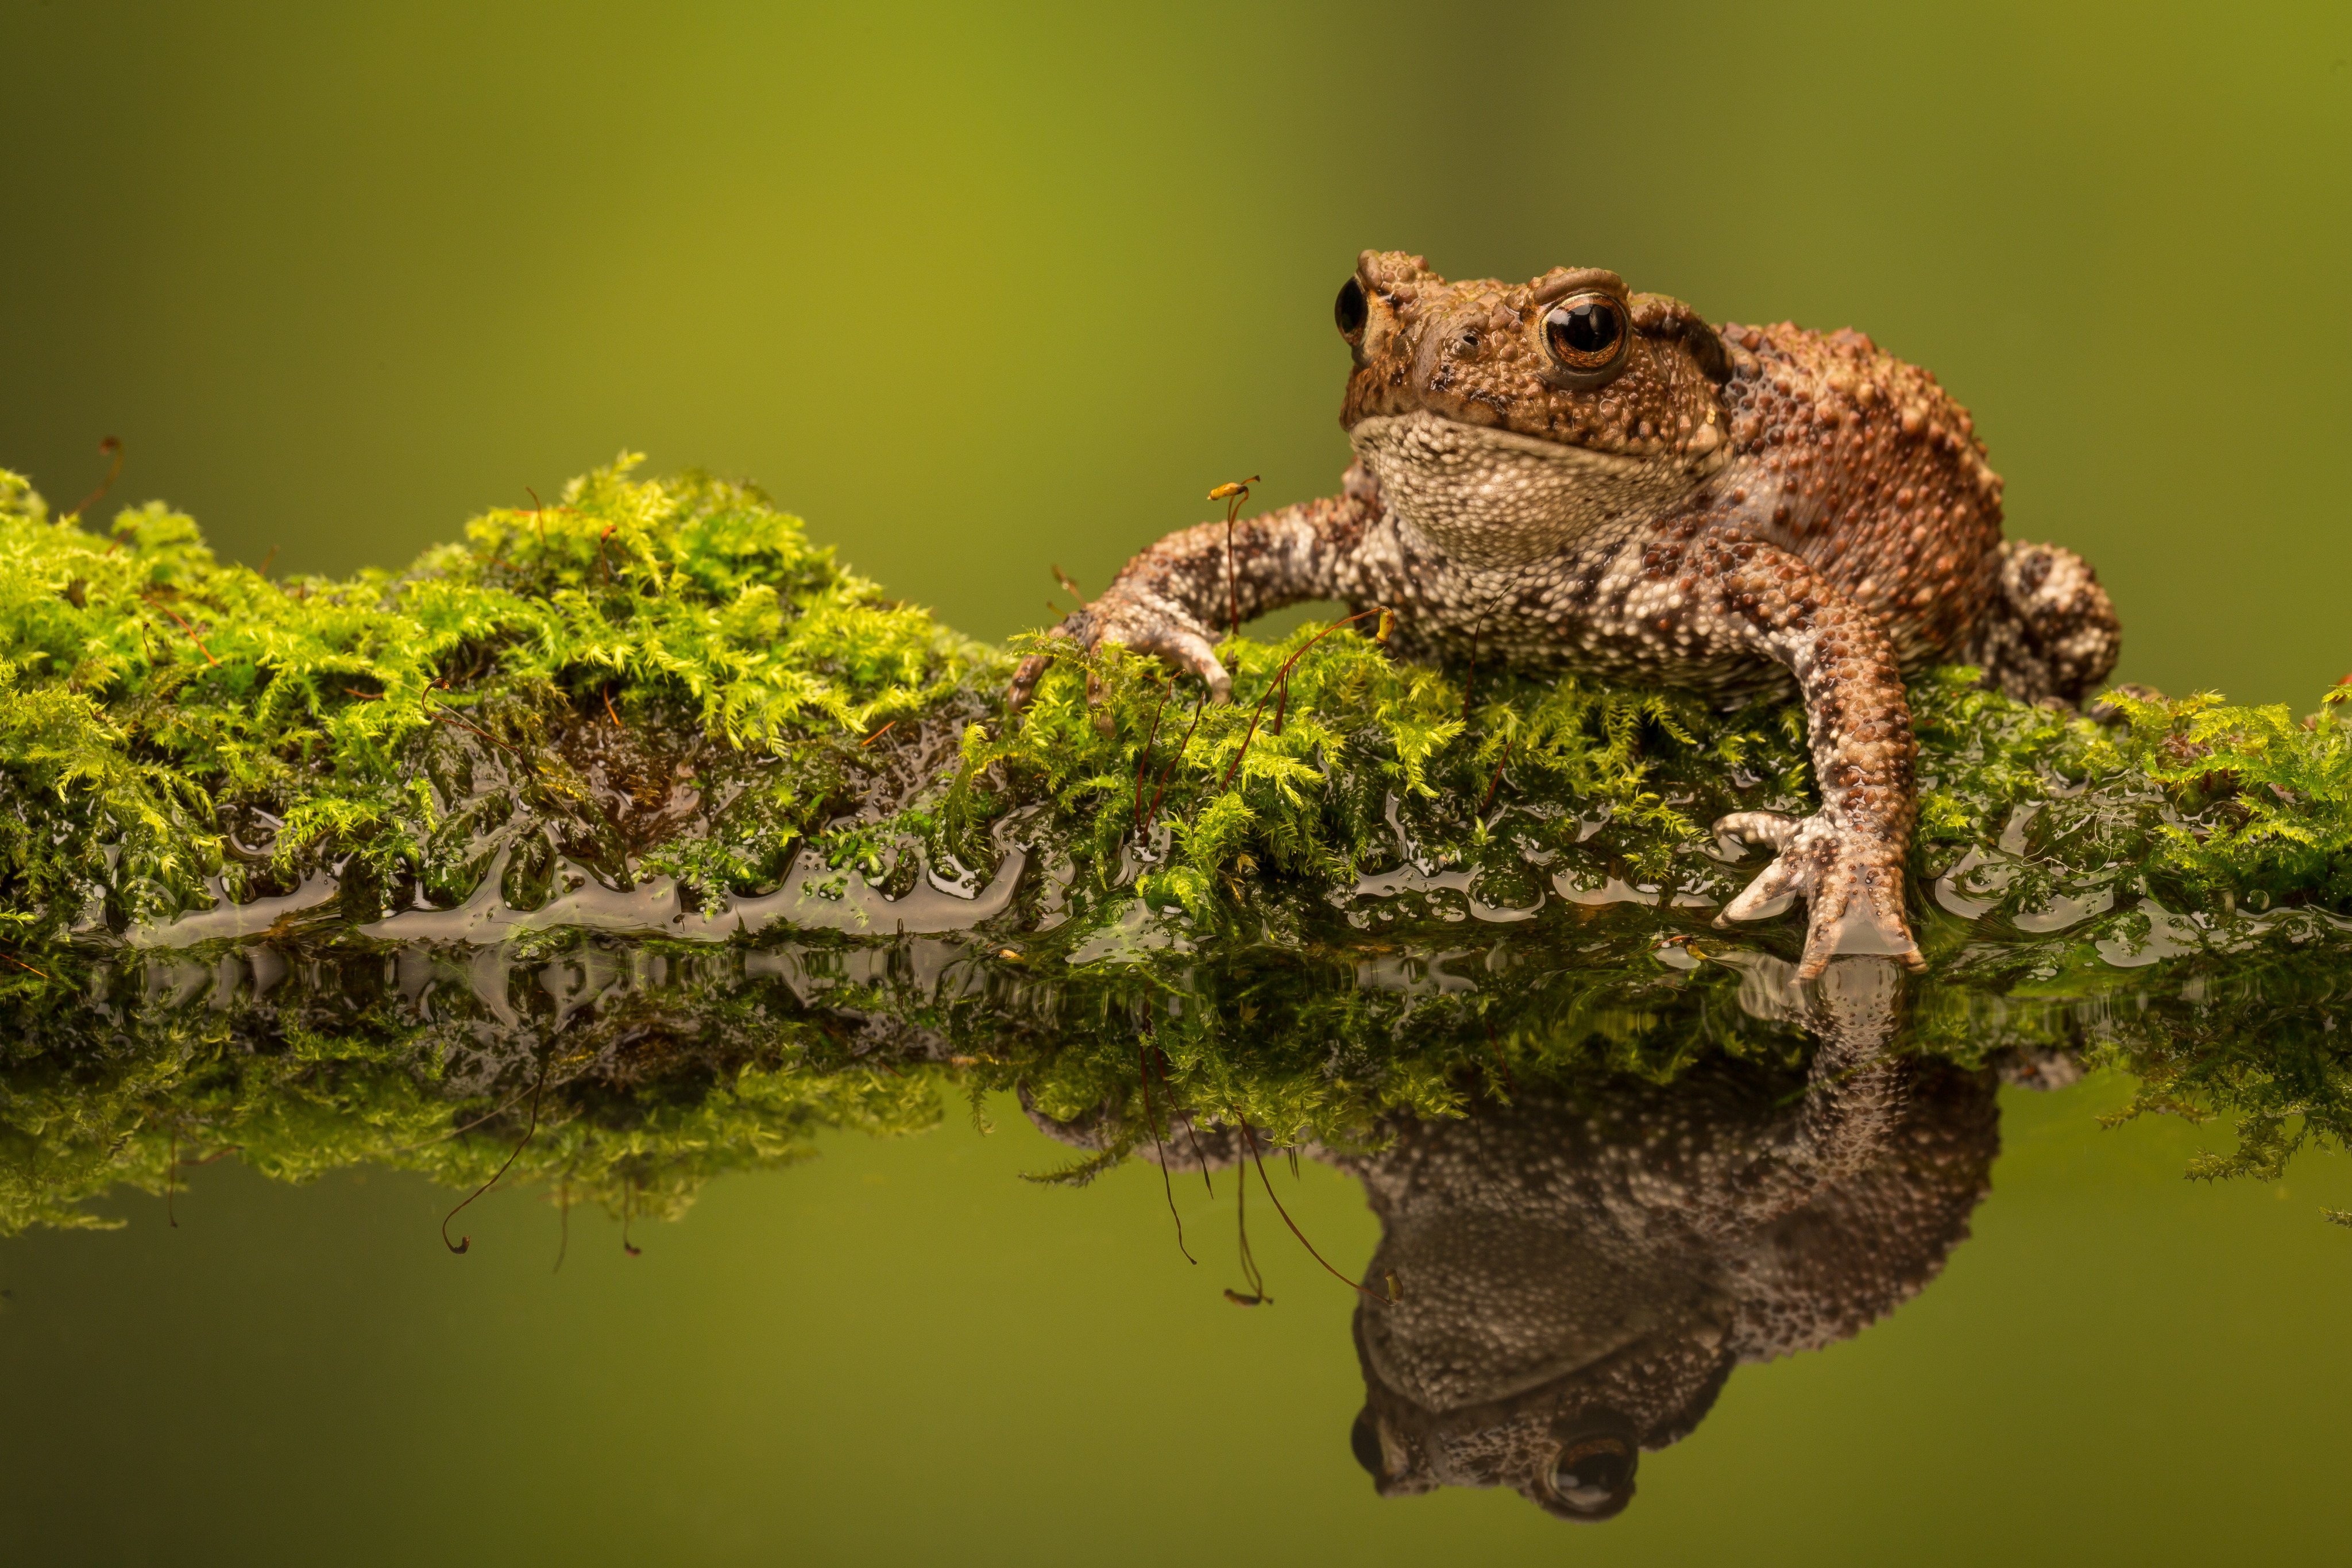 A common toad (above). George Orwell wrote an essay, “Some Thoughts On The Common Toad”, and the nocturnal choruses of a related animal, the bullfrog, prompt some thoughts in a Hong Kong writer, and some solace. Photo: Getty Images